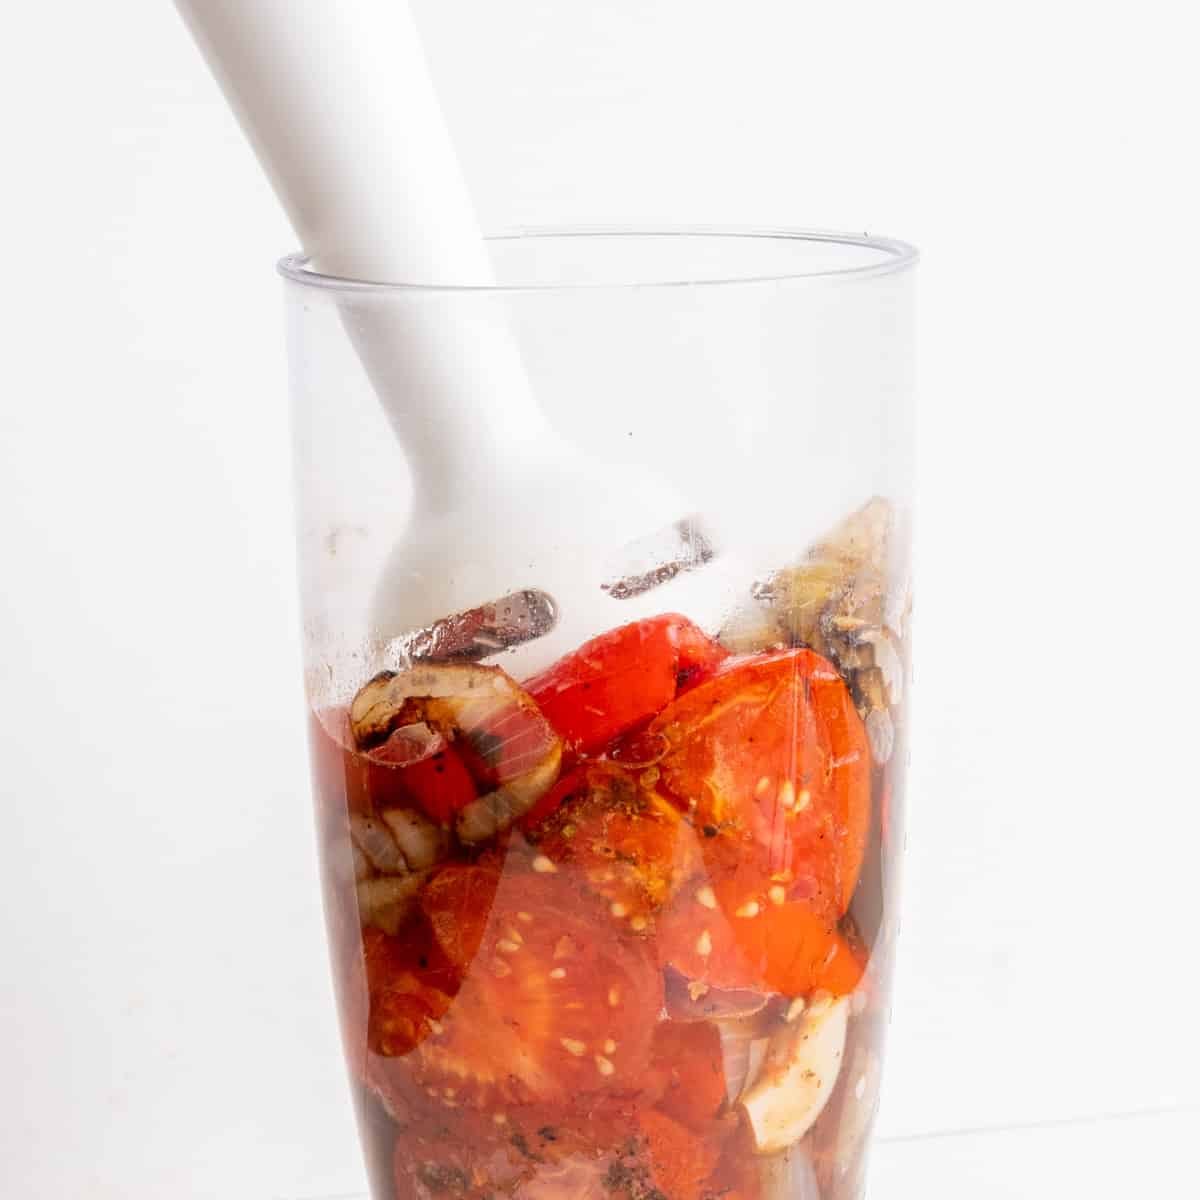 A handheld blender is turning the roasted vegetables into a sauce in a jug.